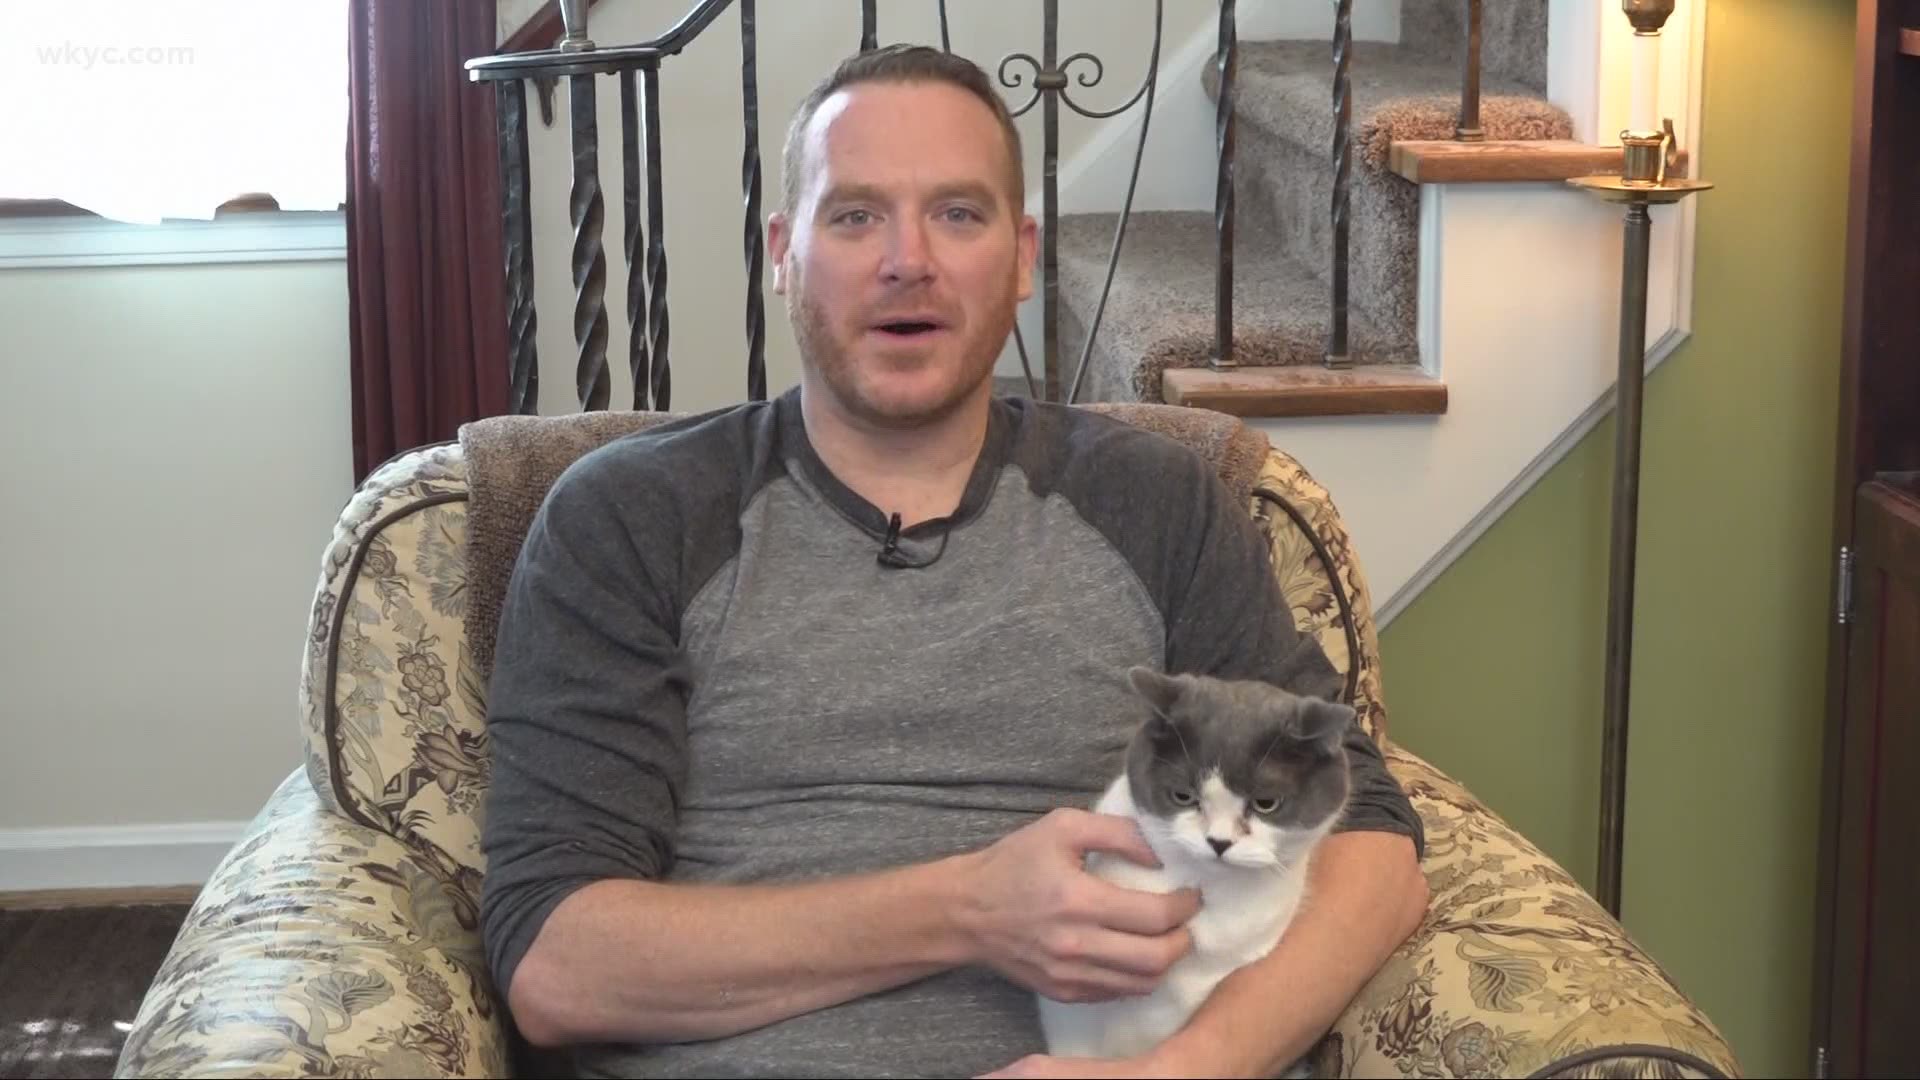 Happy Clear the Shelters month everyone! Mike and his cat MacDuff are happy to be a part of the effort.